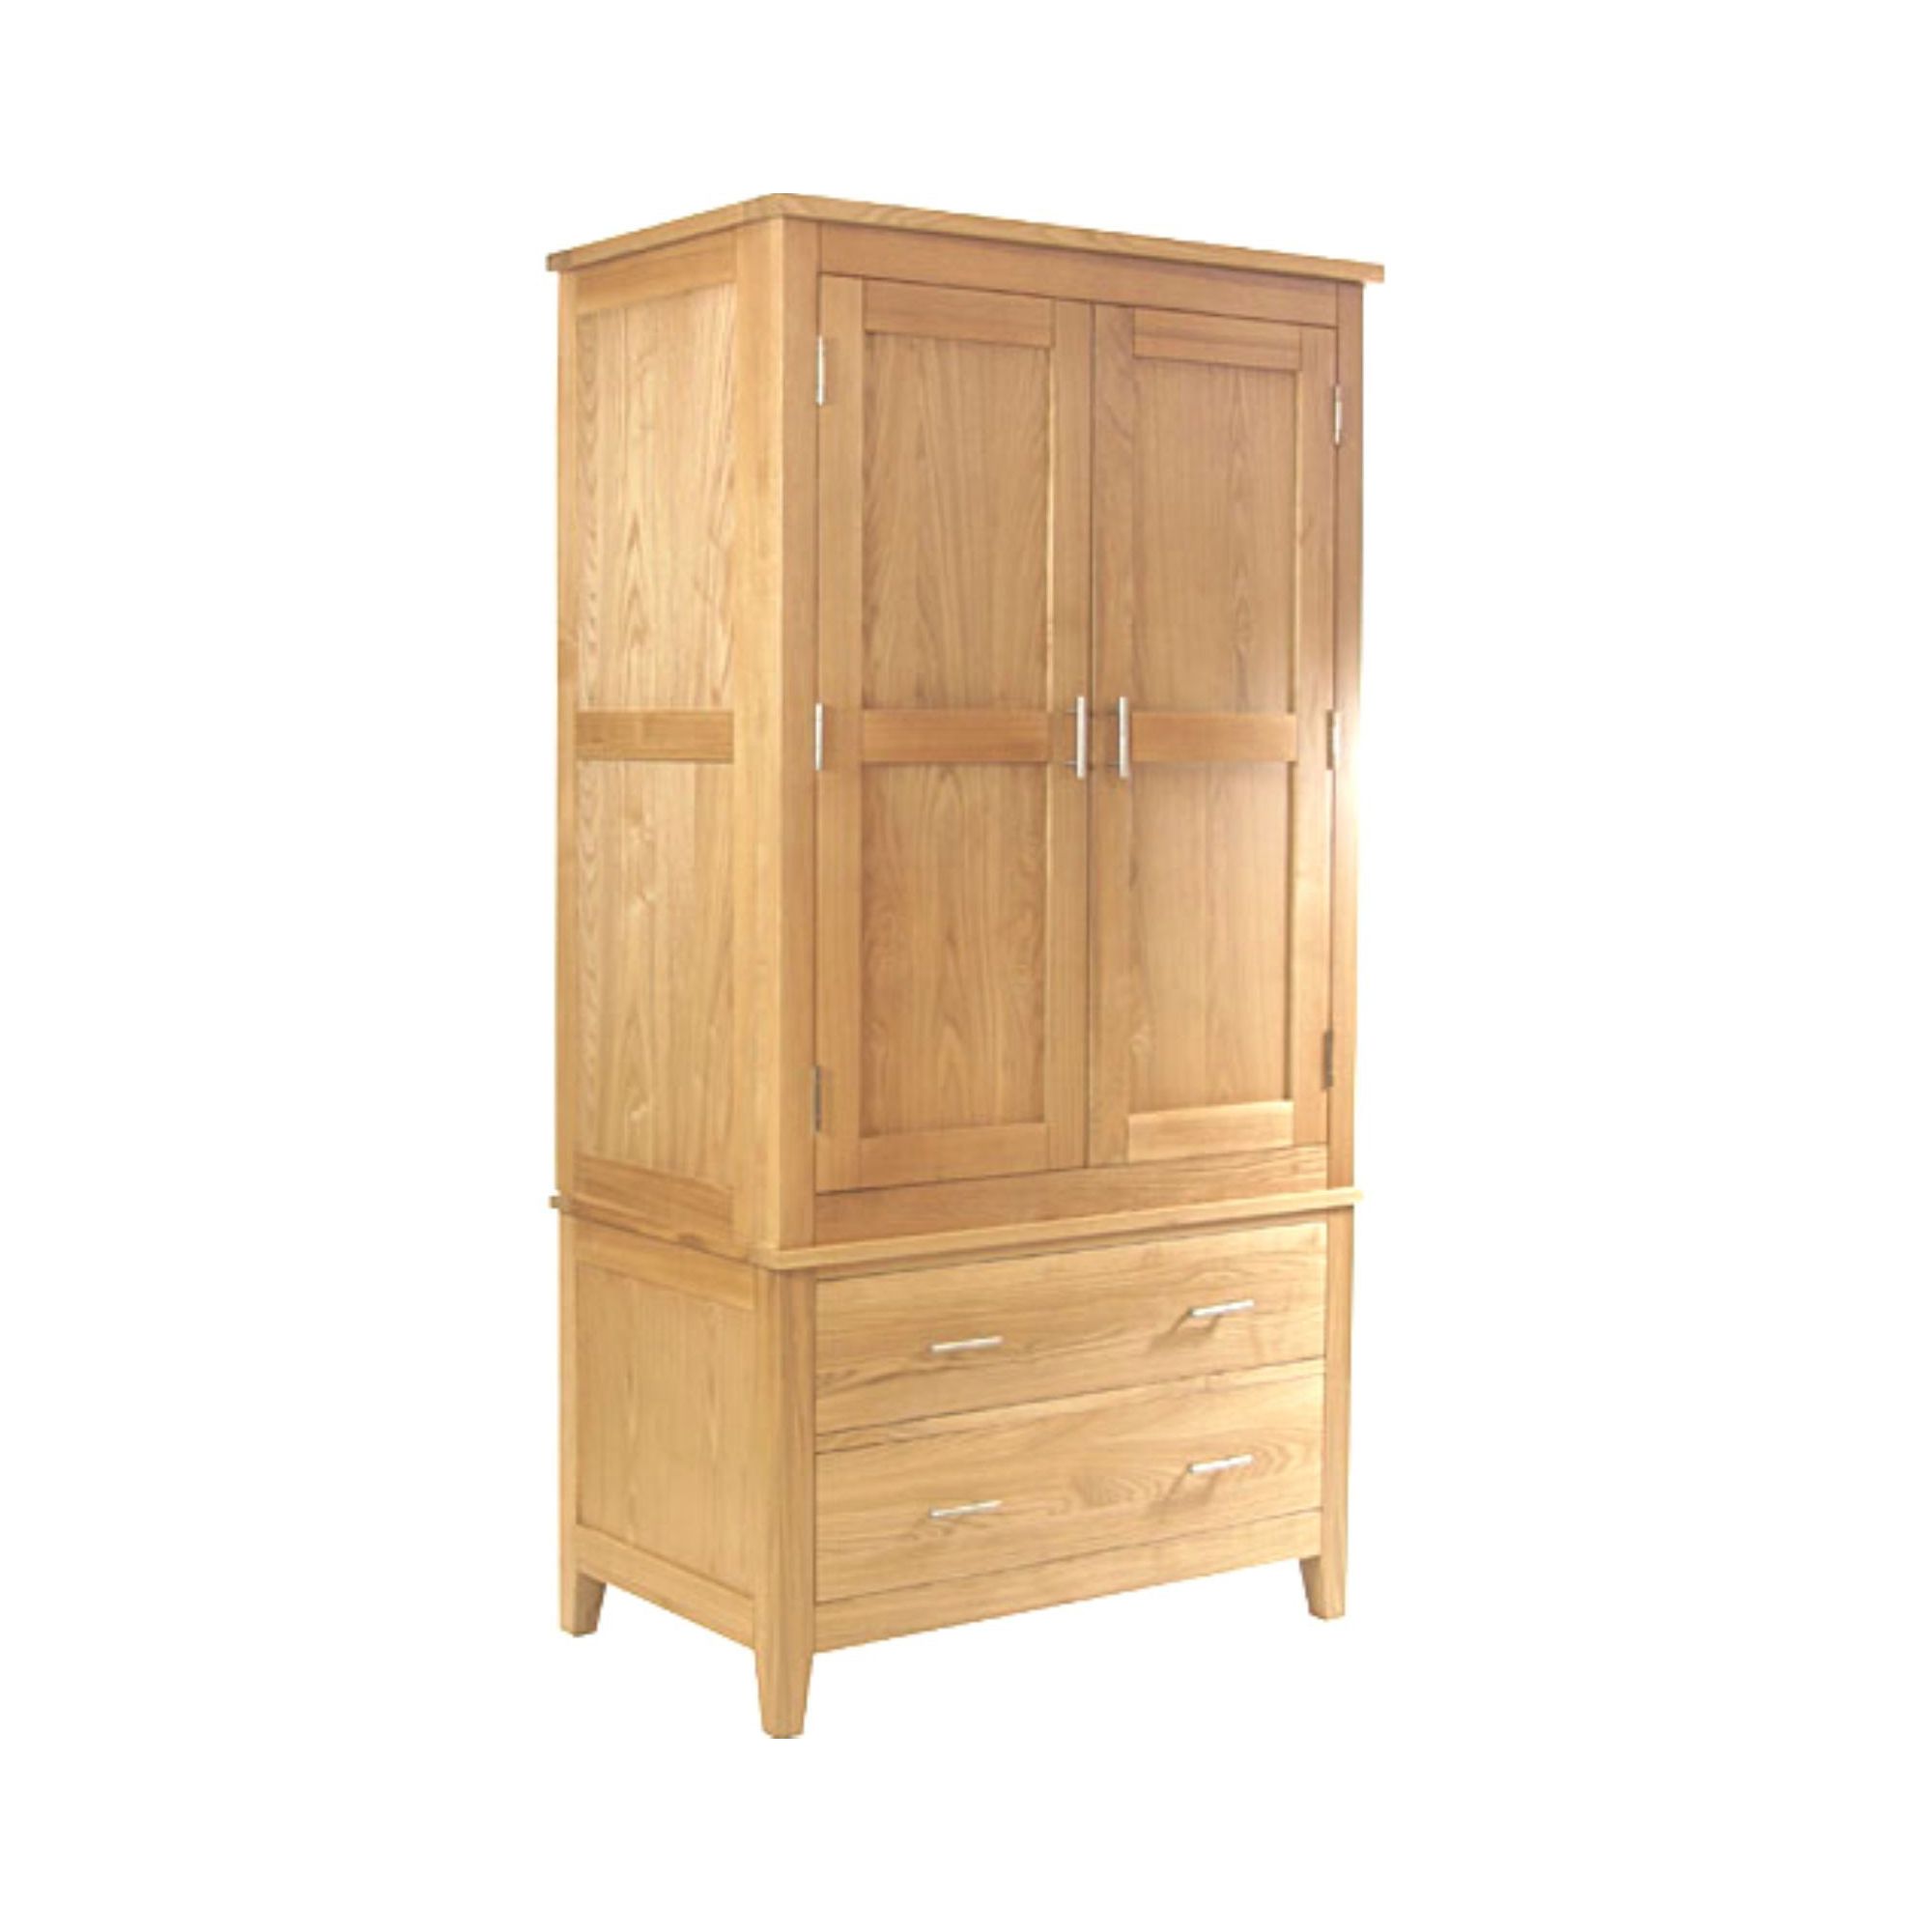 Kelburn Furniture Pacific Gents Wardrobe in Satin Lacquer at Tesco Direct